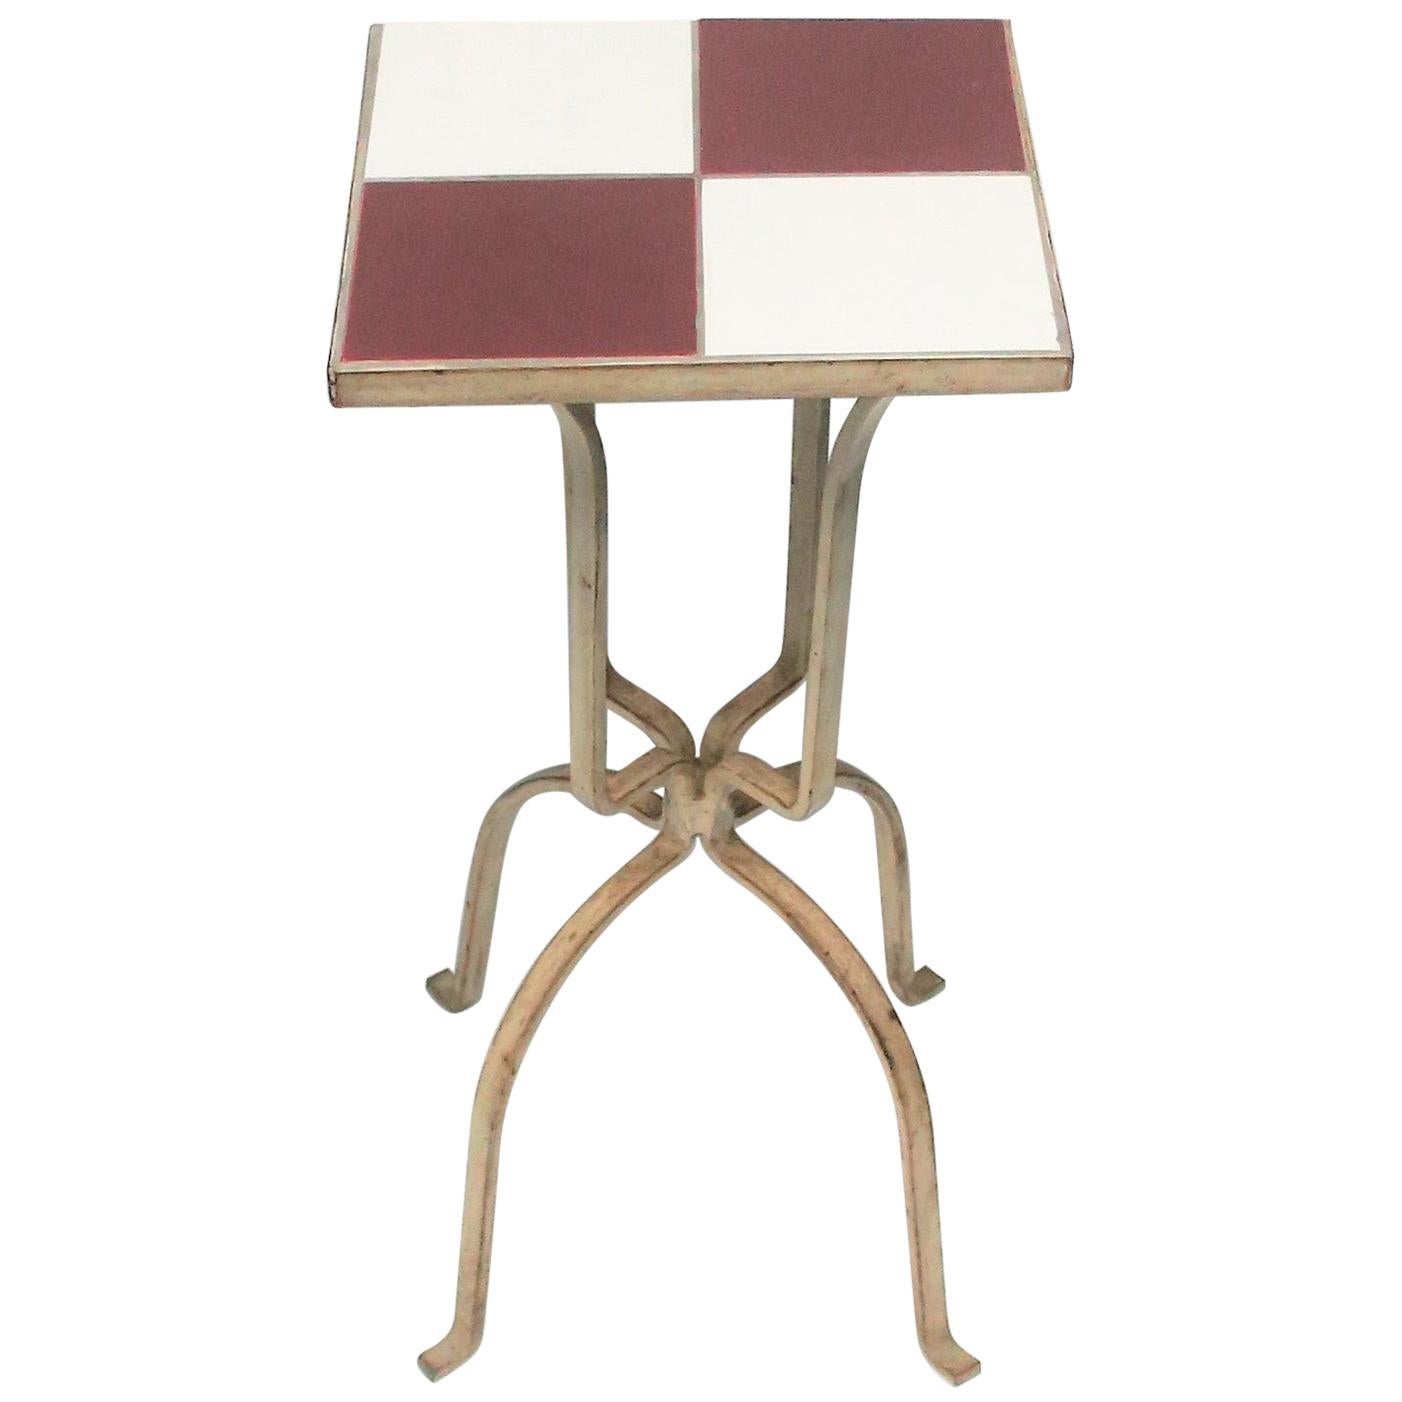 Mid-Century Modern Red and White Ceramic Mosaic Tile Side or Drinks Table